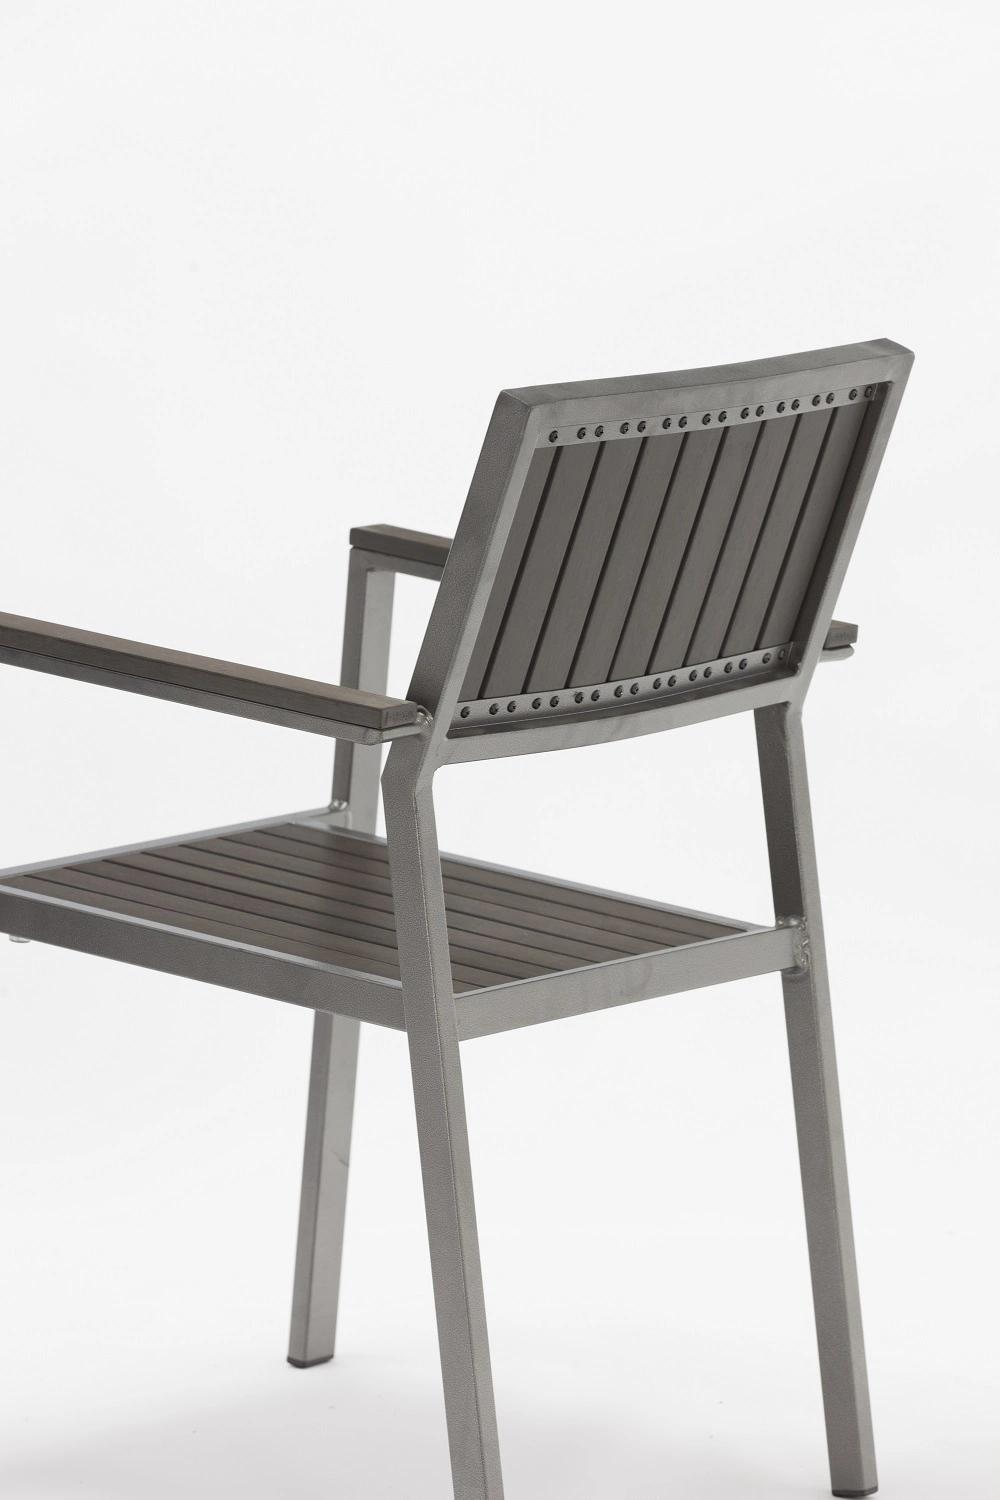 Chair with Eco Wood Perfect for Backyard Garden Furniture